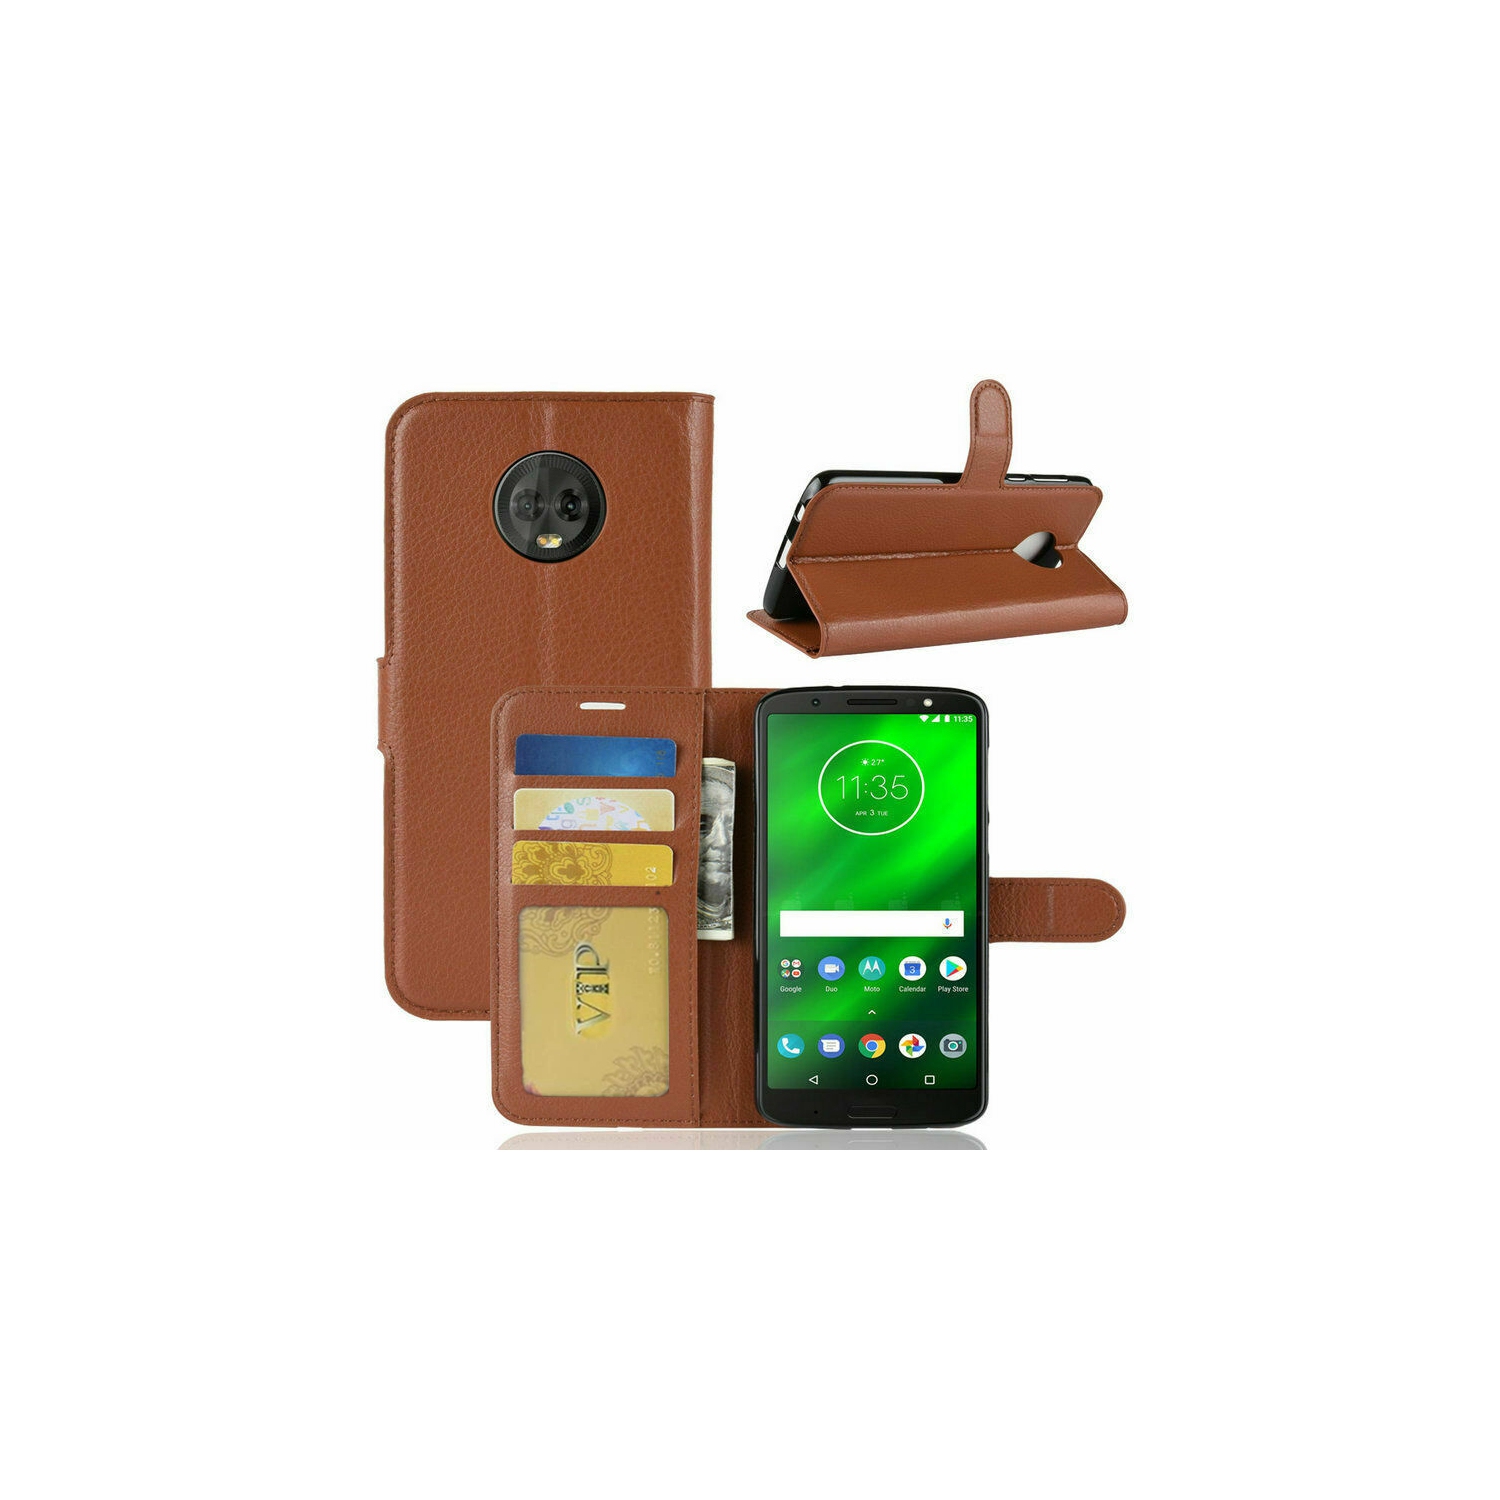 [CS] Motorola Moto G6 Case, Magnetic Leather Folio Wallet Flip Case Cover with Card Slot, Brown